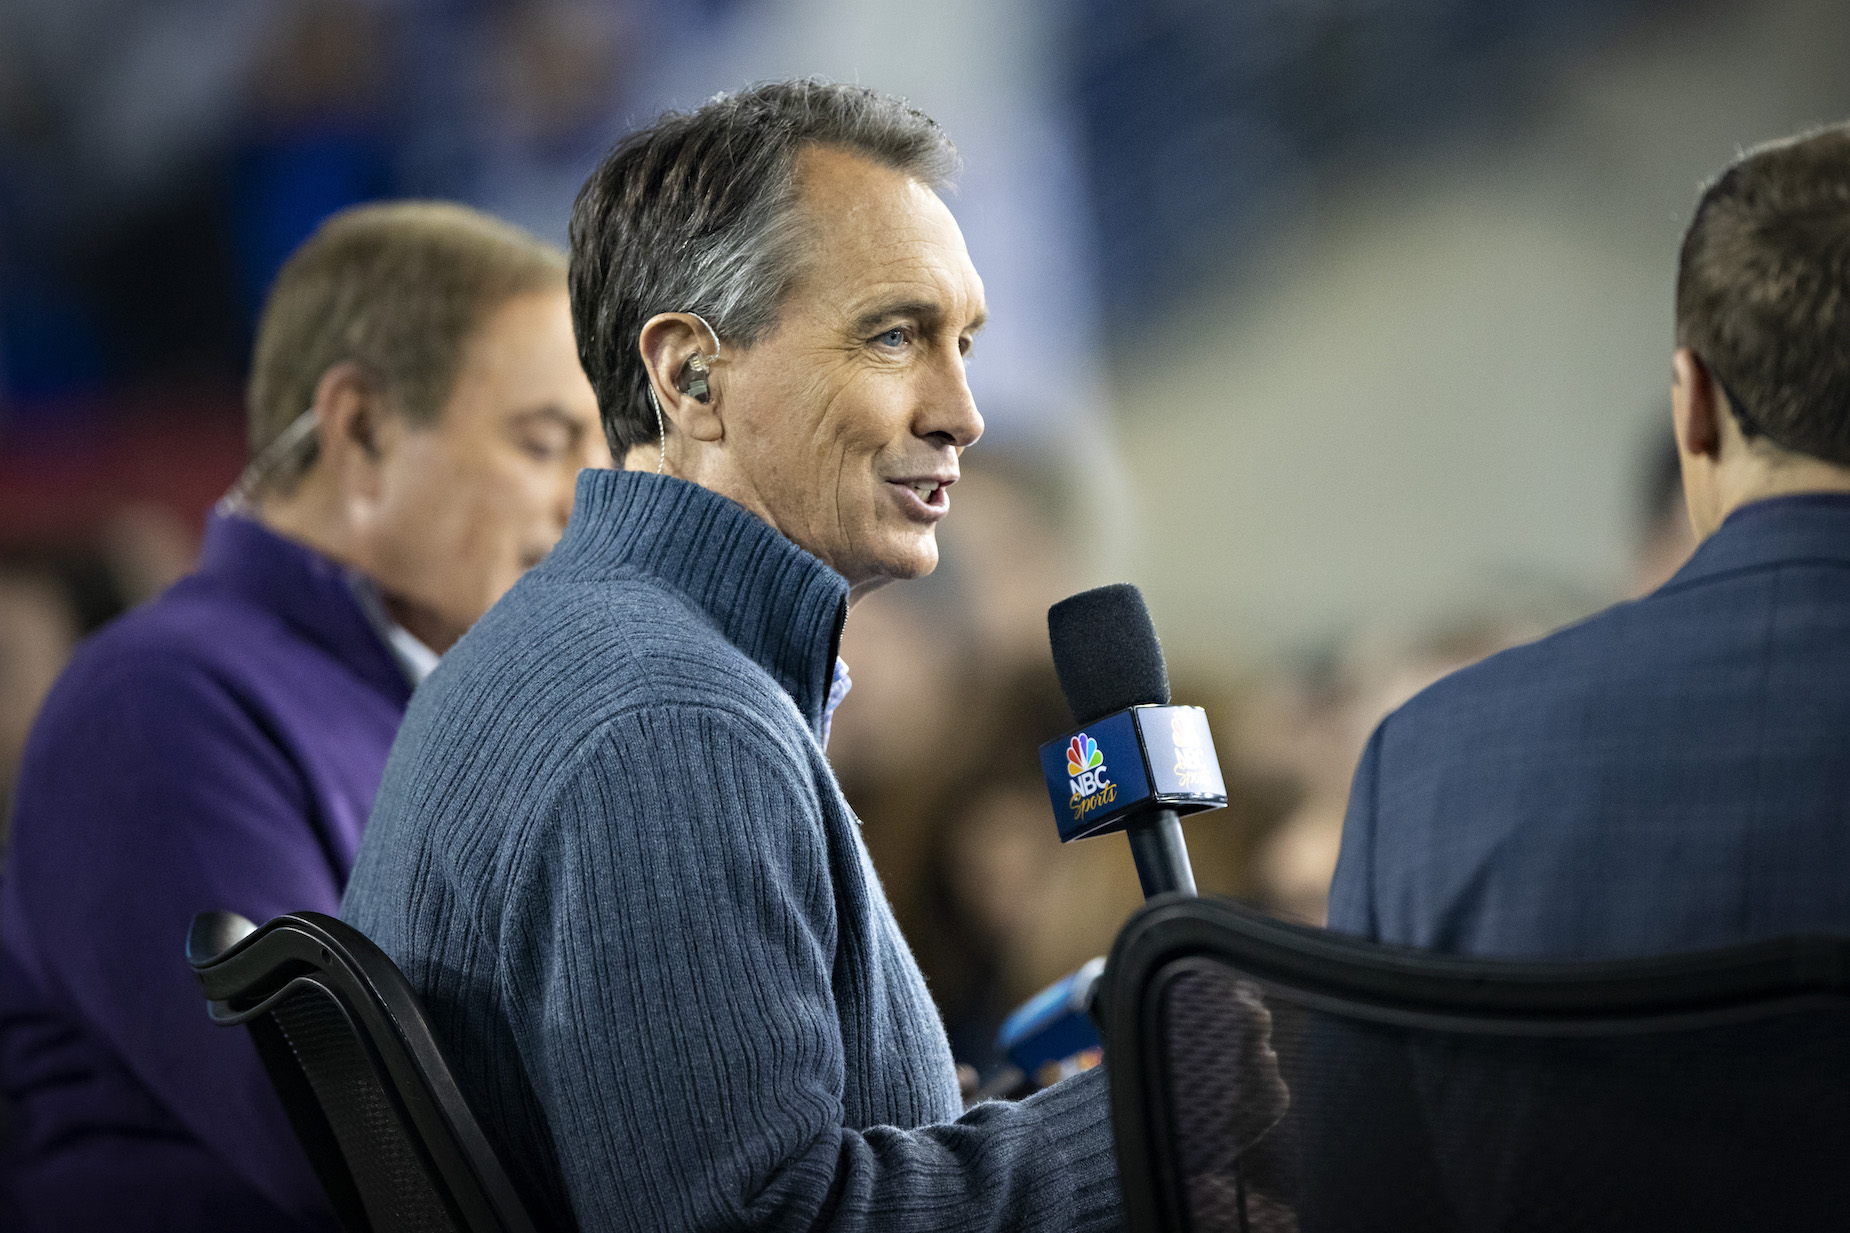 Cris Collinsworth earned some rare praise on Sunday Night when called out the Philadelphia Eagles' quarterback change.